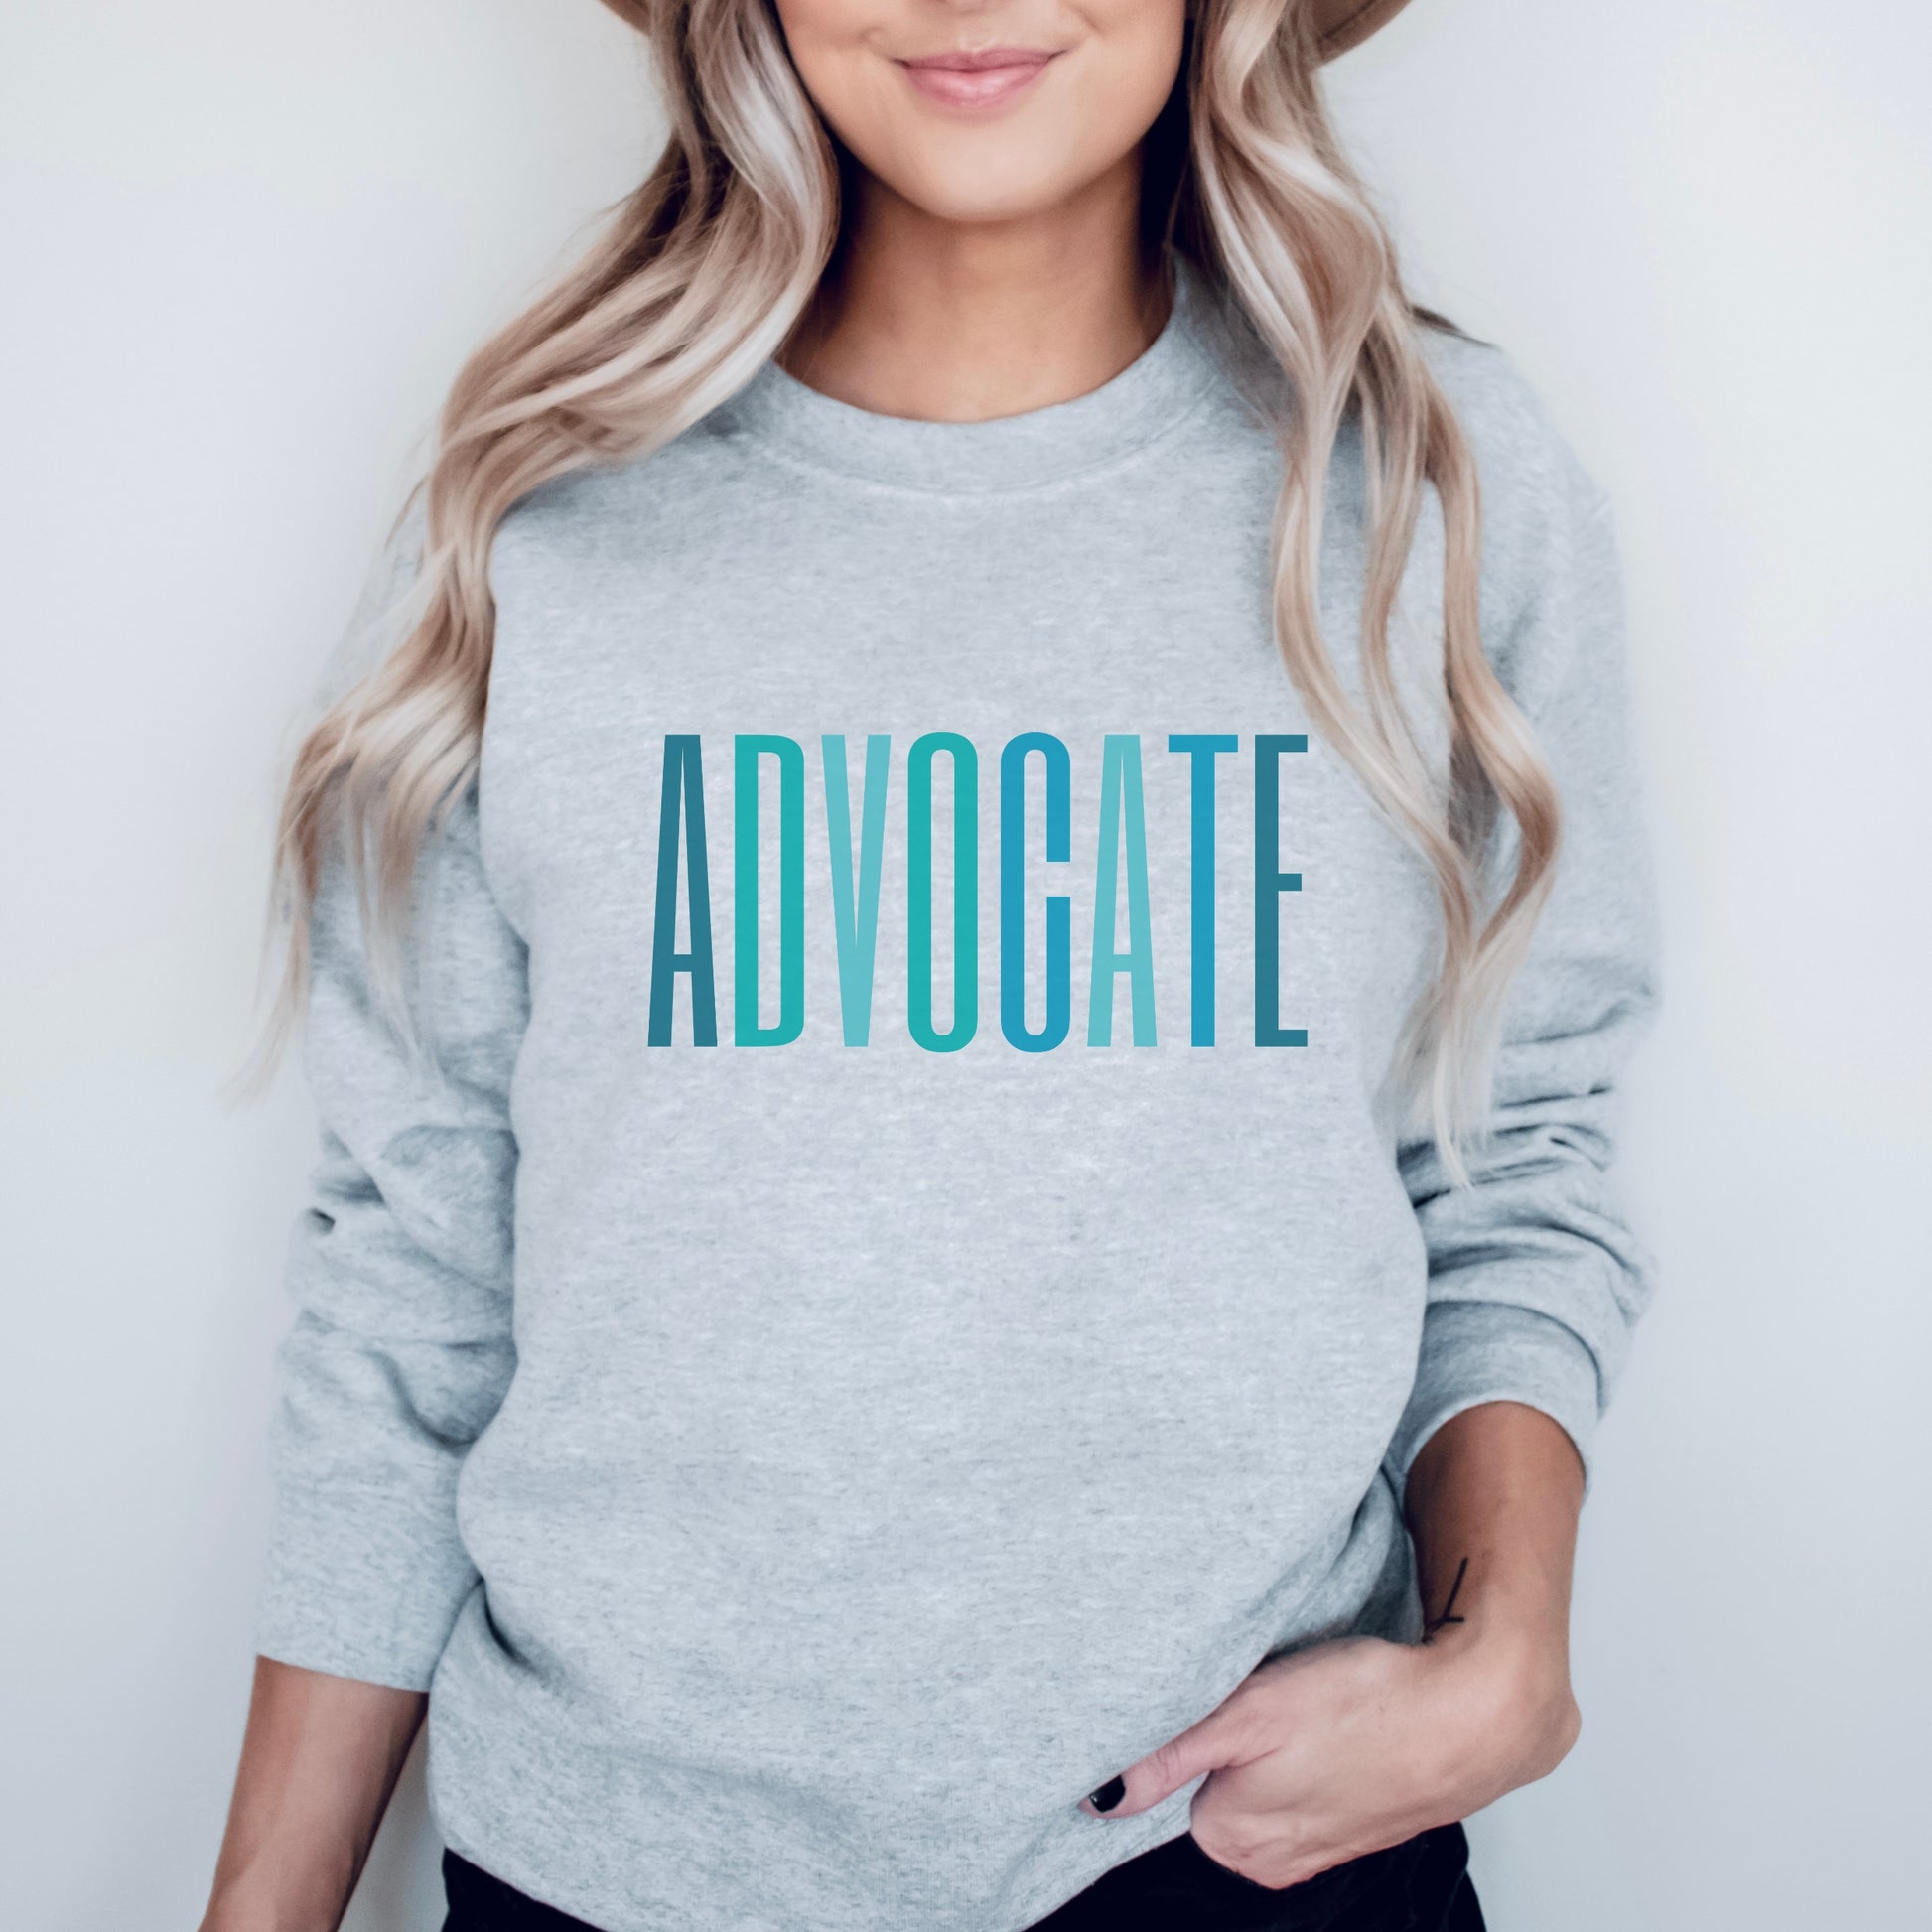 The front of the sweatshirt proudly displays the word ADVOCATE in a bold and eye catching font in varying shades of blue which is the color of child advocacy. It is a wearable symbol of your dedication to a world where all children are loved, cherished, and protected.